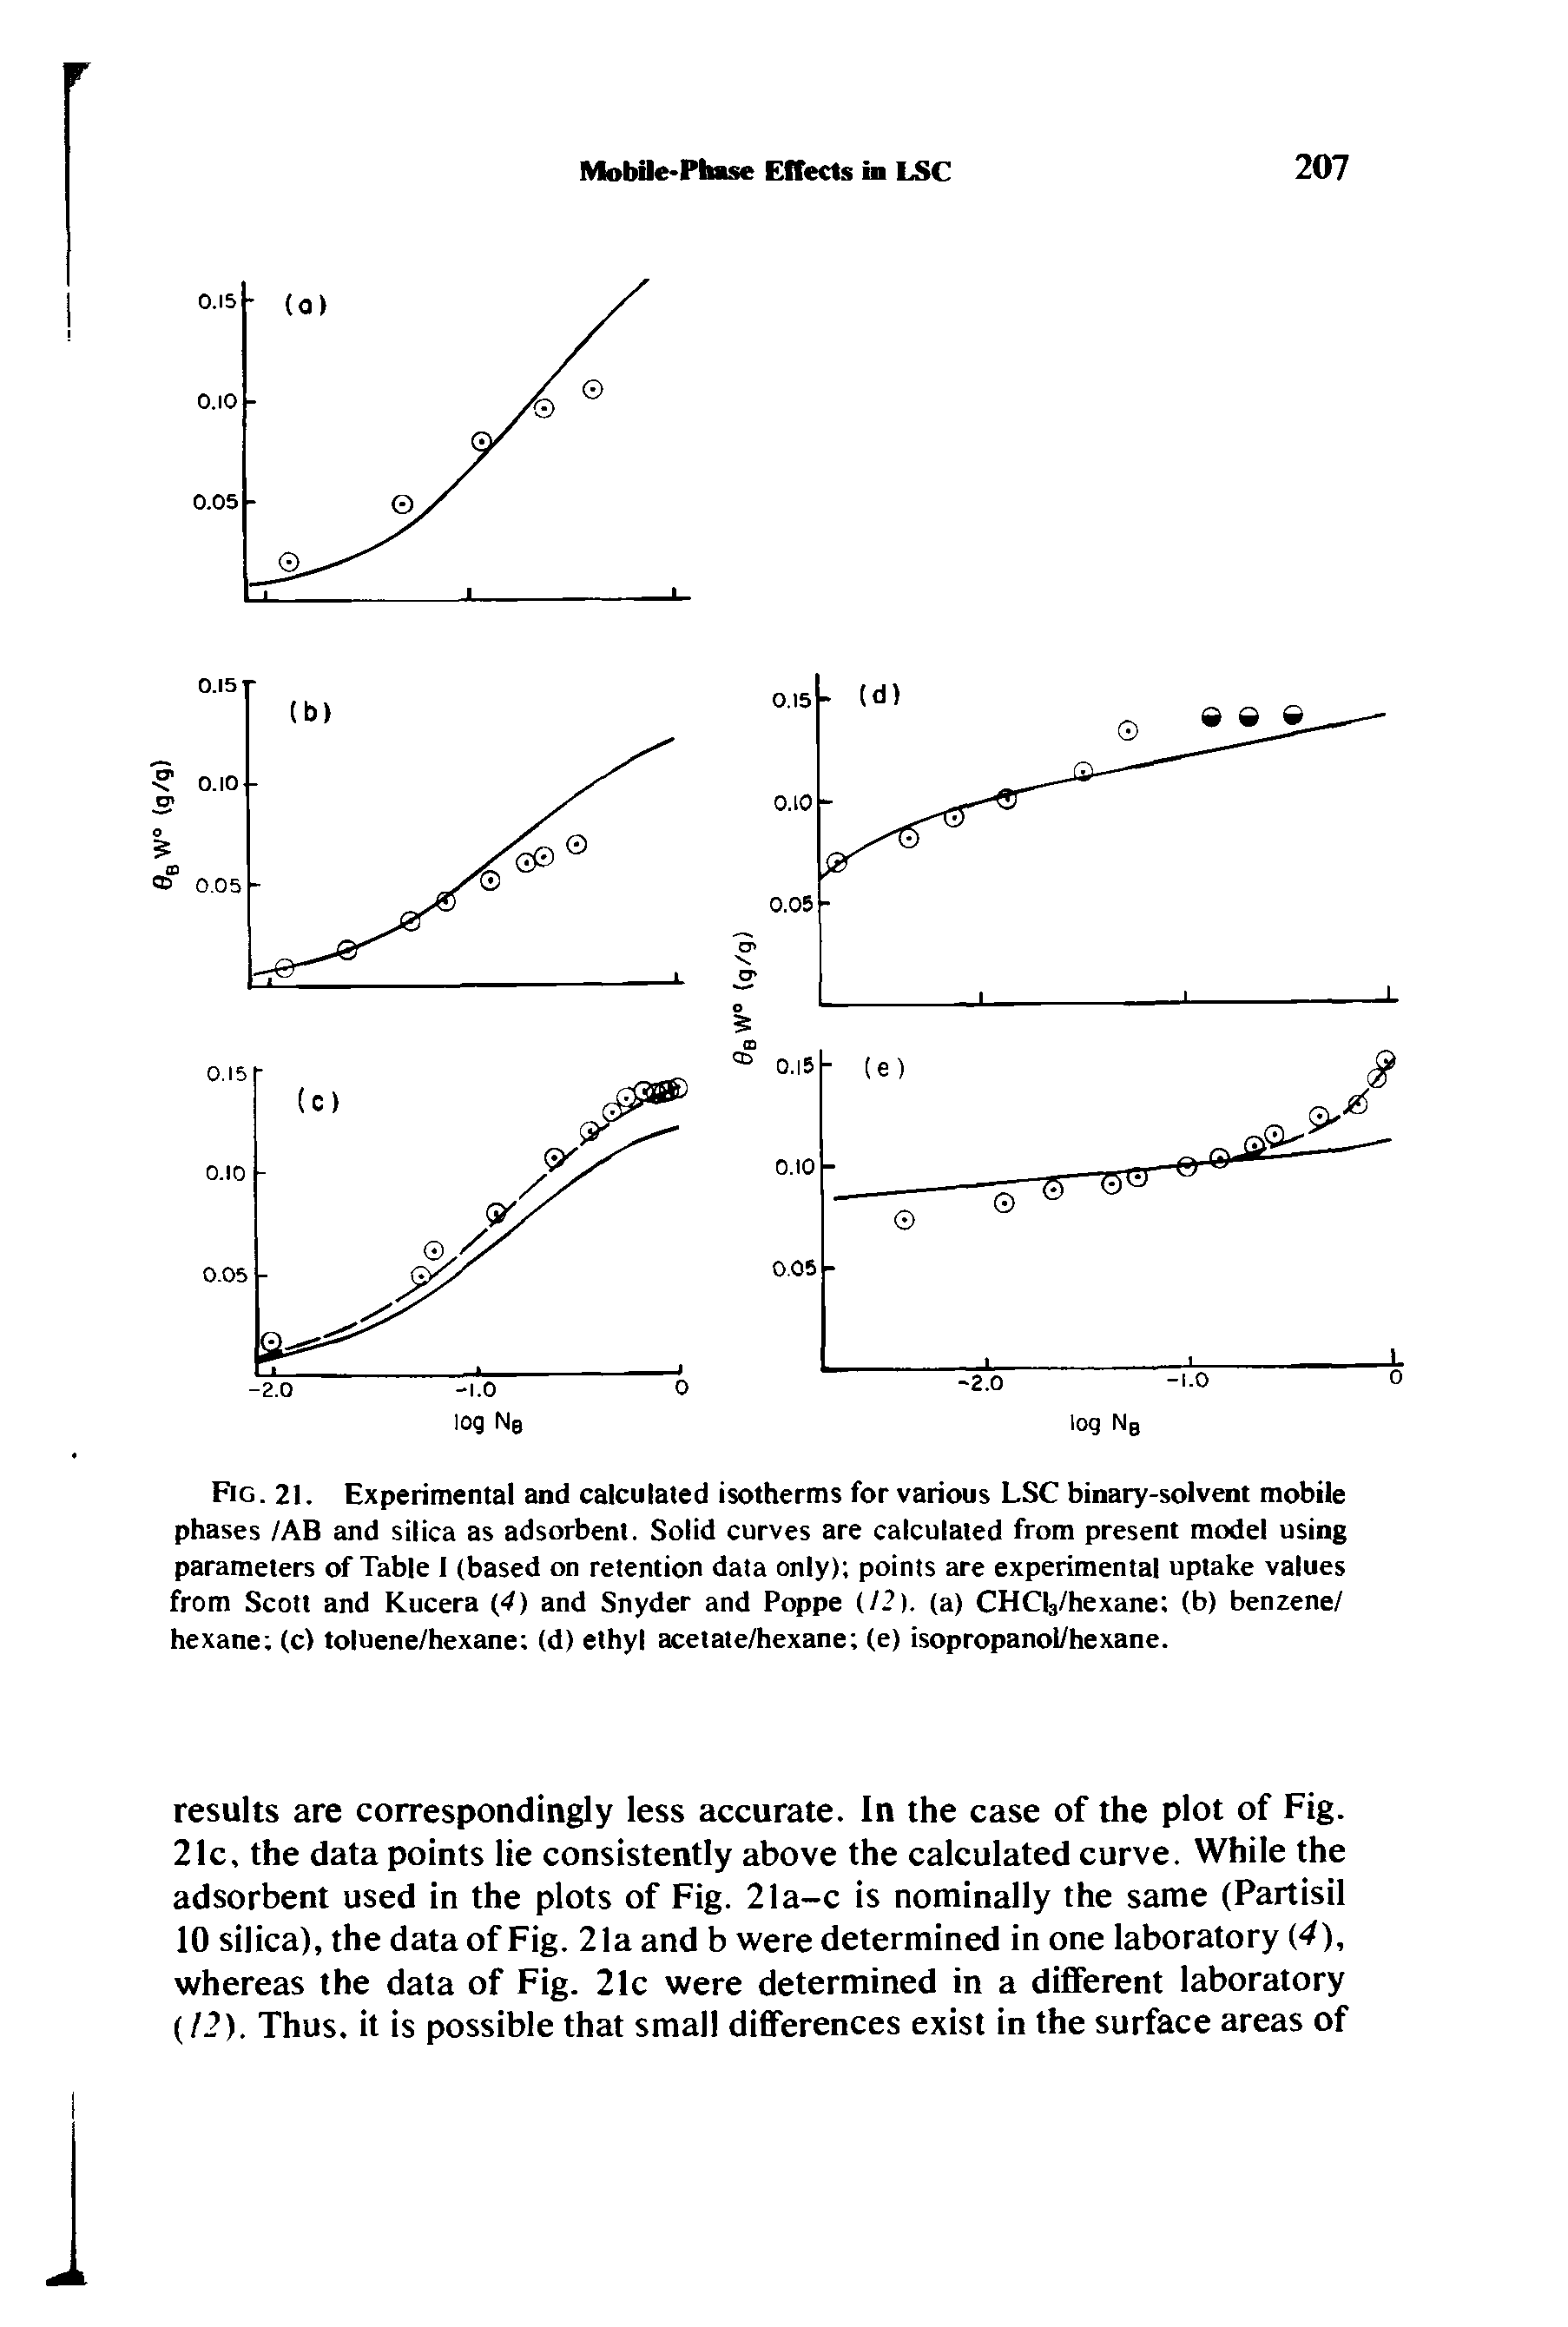 Fig. 21. Experimental and calculated isotherms for various LSC binary-solvent mobile phases /AB and silica as adsorbent. Solid curves are calculated from present model using parameters of Table I (based on retention data only) points are experimental uptake values from Scott and Kucera (4) and Snyder and Poppe (12). (a) CHCt/hexane (b) benzene/ hexane (c) toluene/hexane (d) ethyl acetate/hexane (e) isopropanol/hexane.